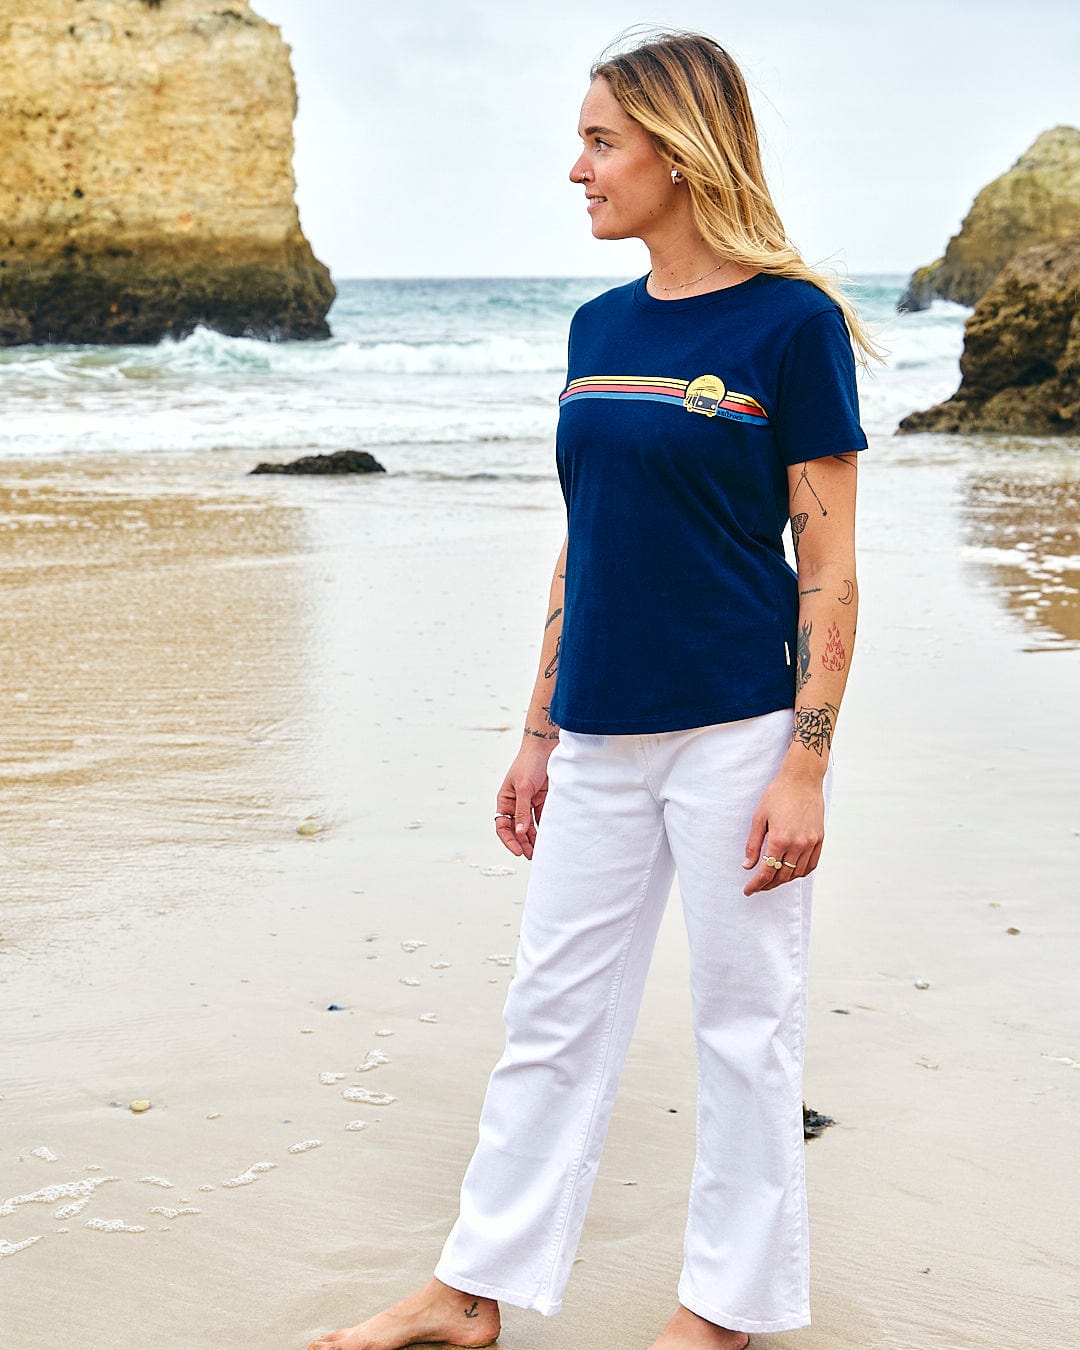 A woman standing on the beach wearing a Saltrock Celeste Stripe - Womens Short Sleeve T-Shirt - Blue and white pants.